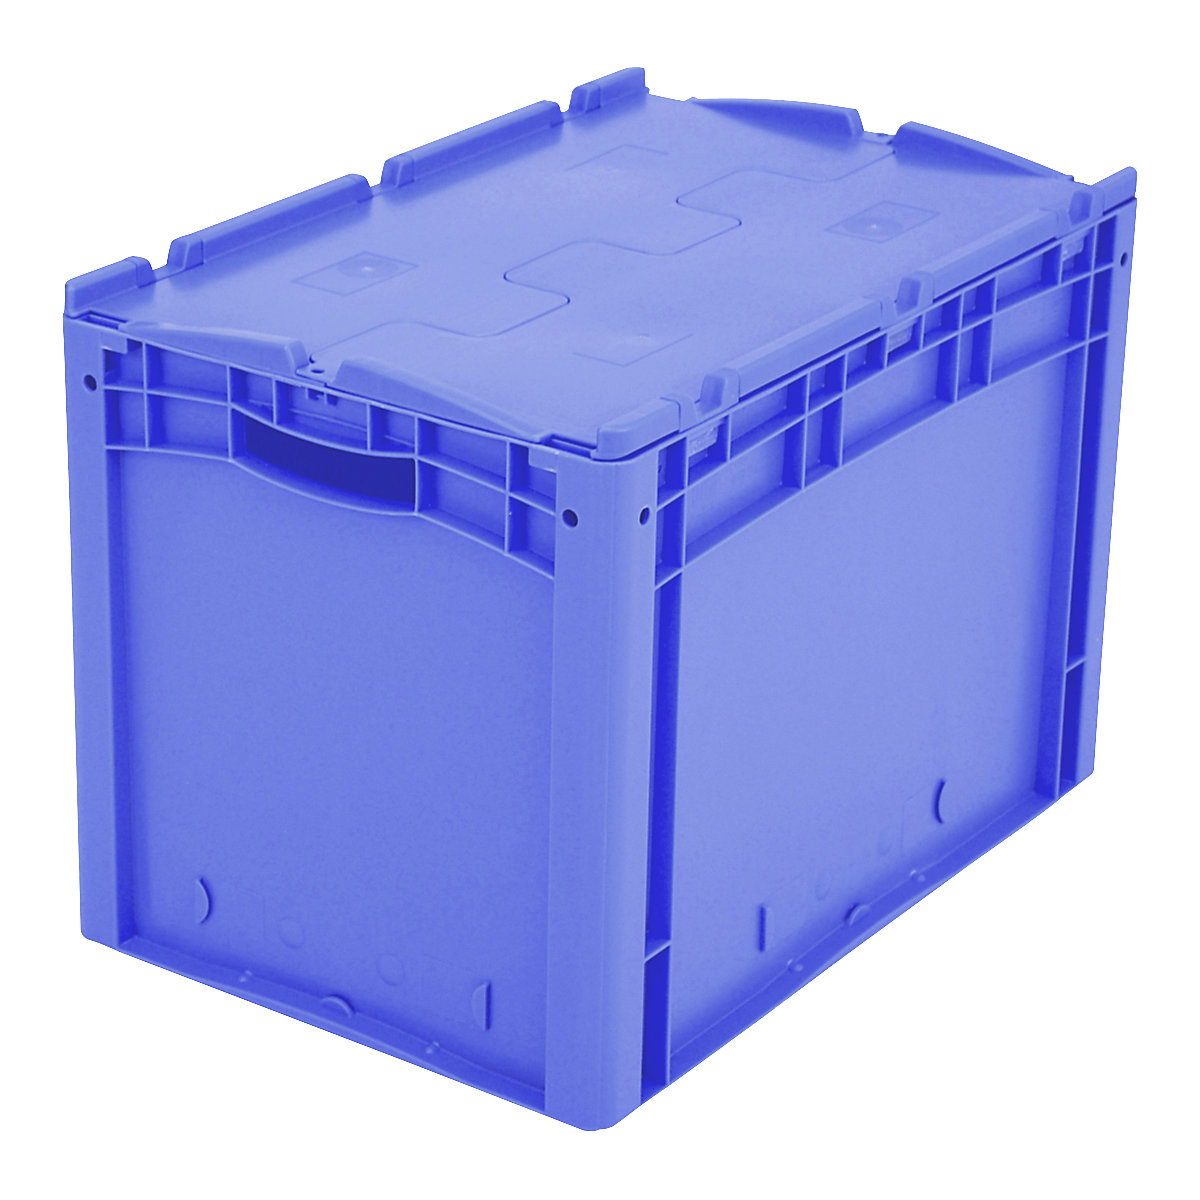 XL Euro stacking container – BITO, with 2-section hinged lid, LxWxH 600 x 400 x 438 mm-12